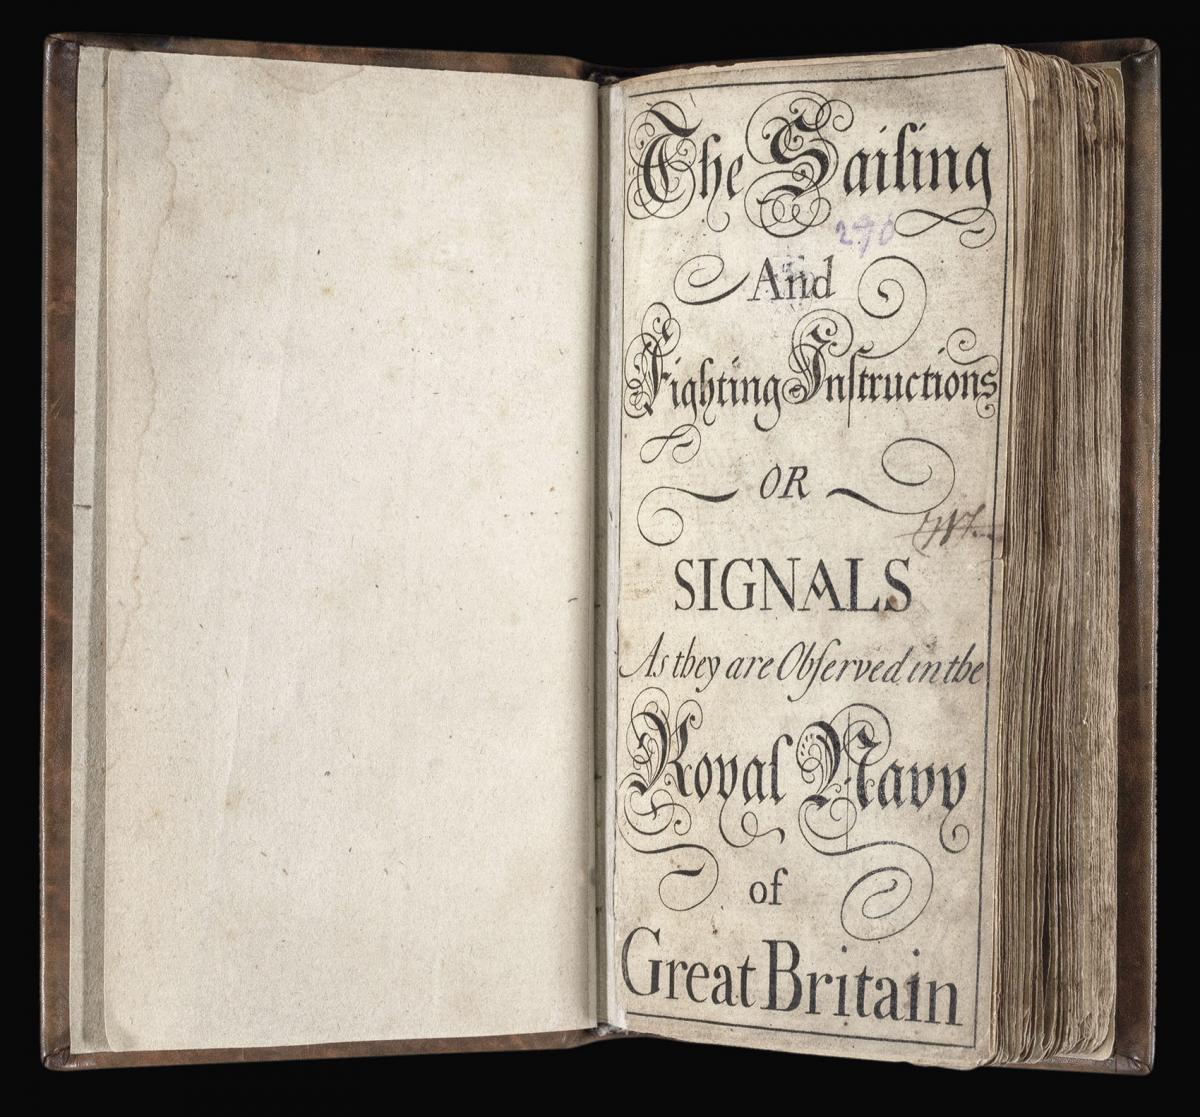 The first printed English signals book